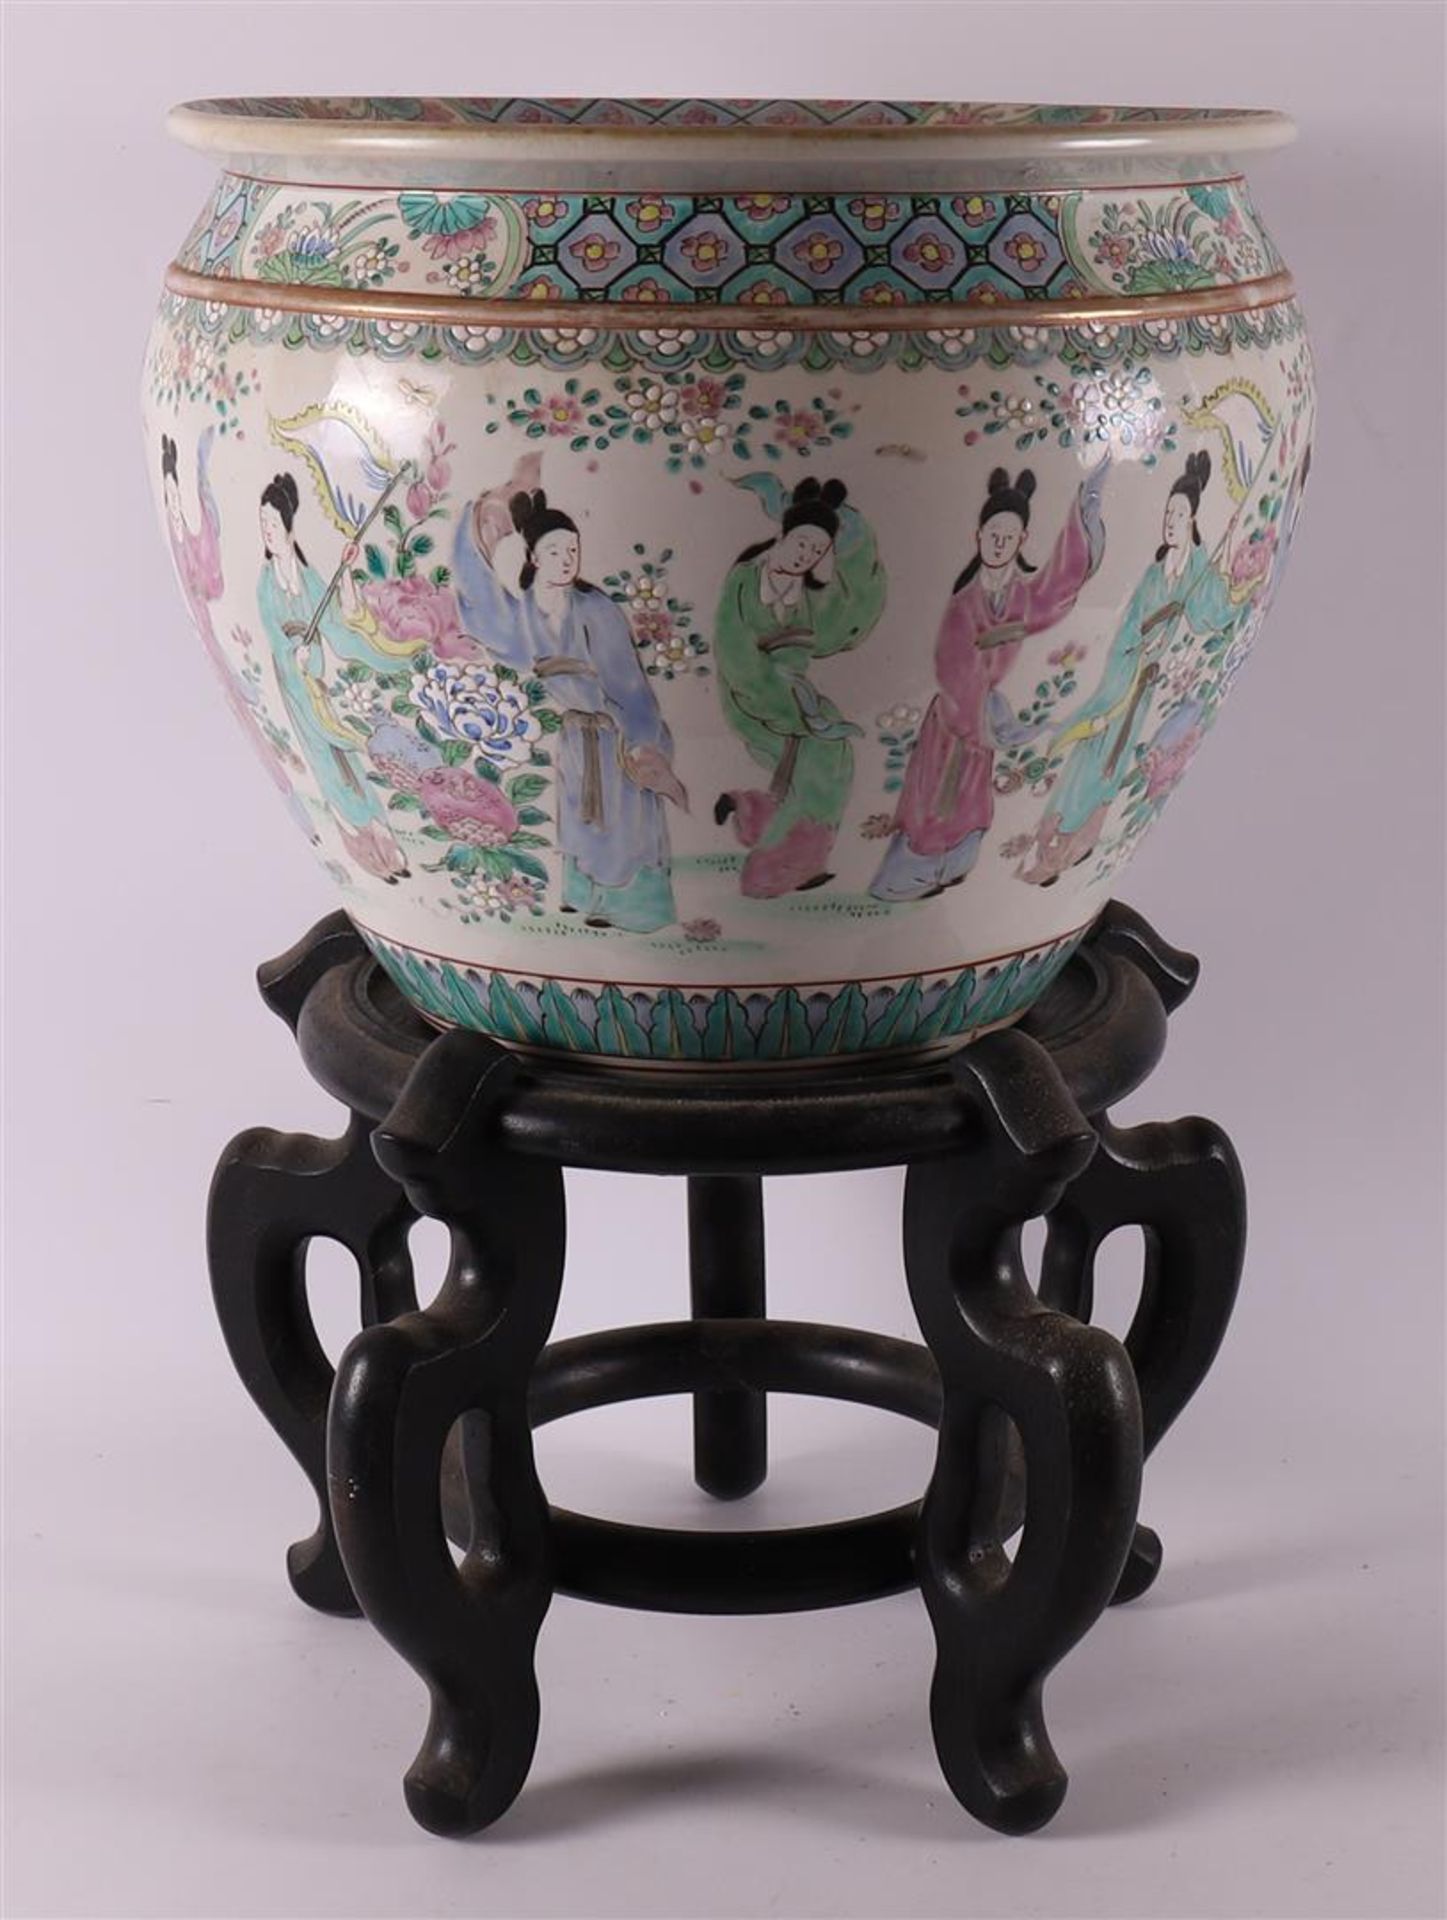 A porcelain cachepot or fishbowl on a loose wooden base, China, 20th century. - Image 3 of 7